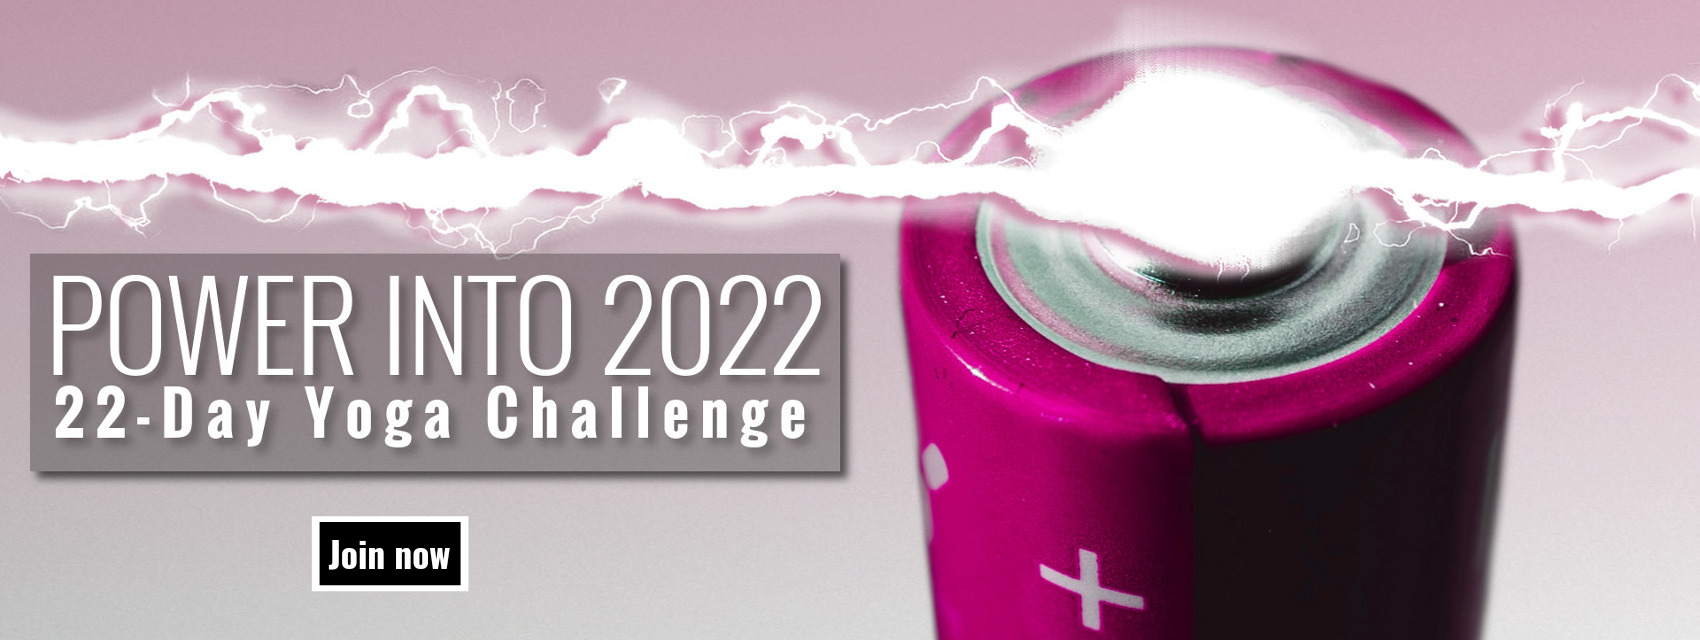 Start your year right by joining our 2022 New Year's Challenge!